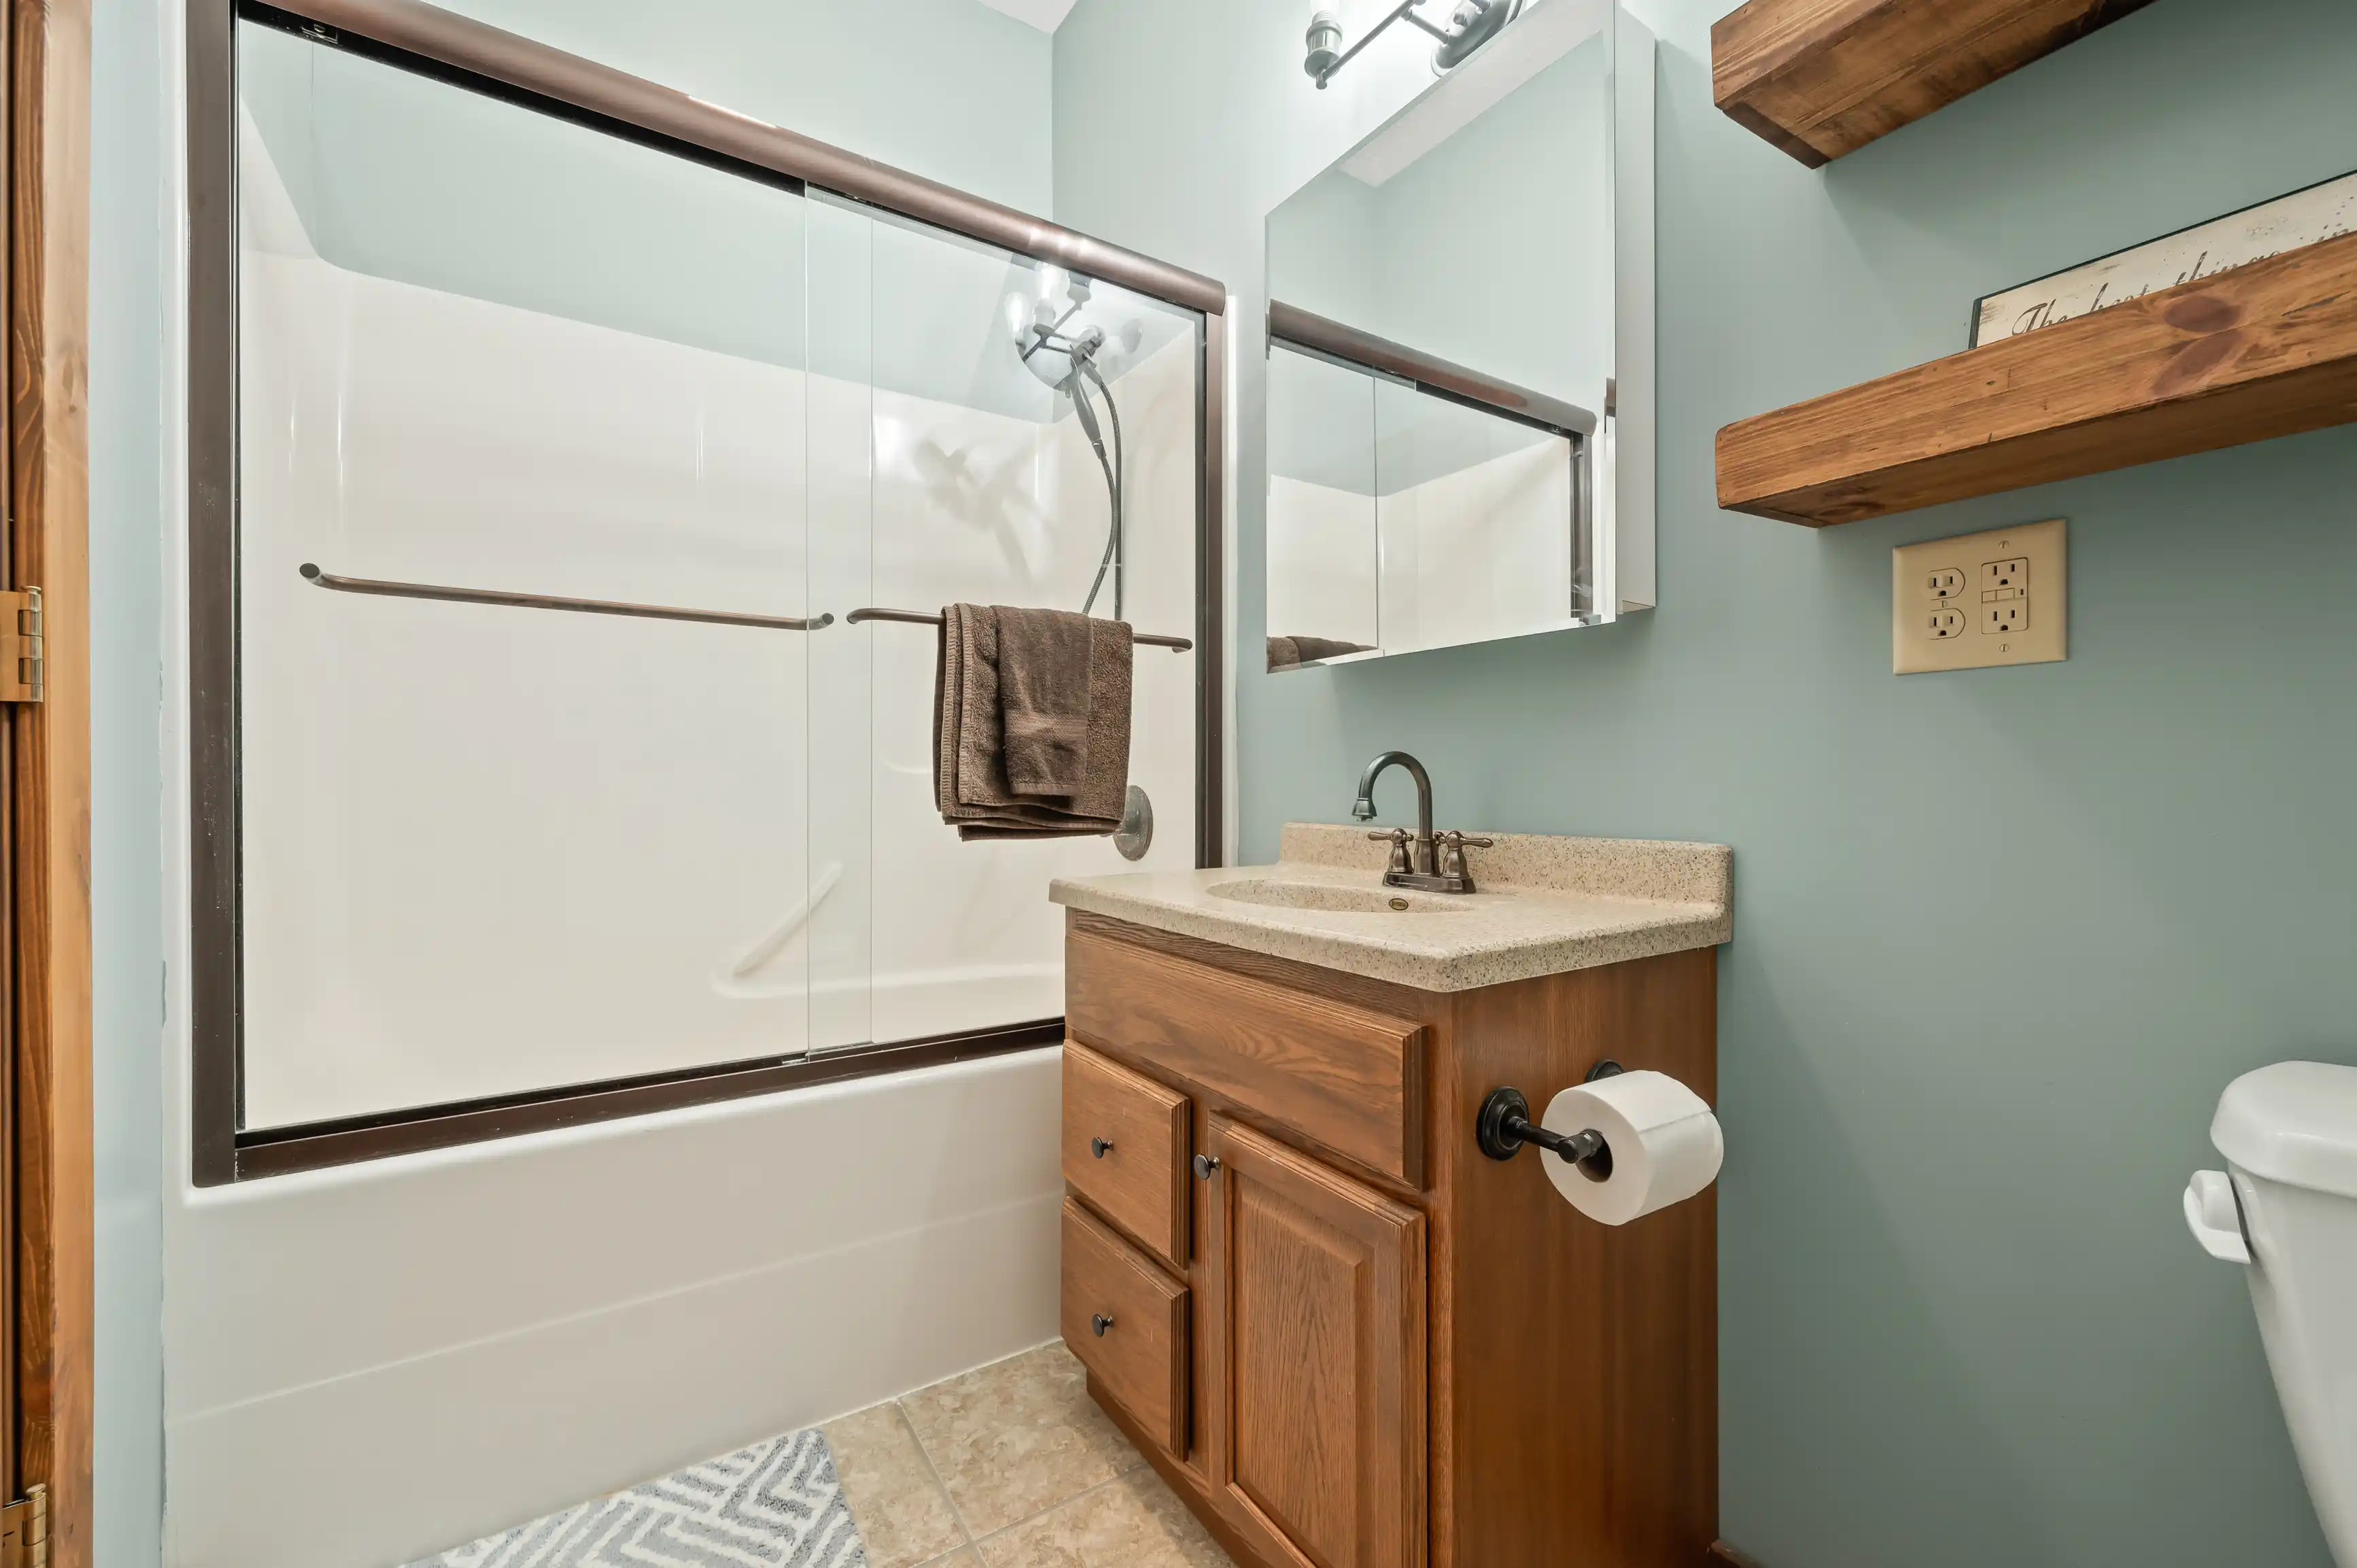 A modern bathroom with a sliding glass door shower, wooden vanity with a granite top, large mirror, floating wooden shelves, and a toilet.